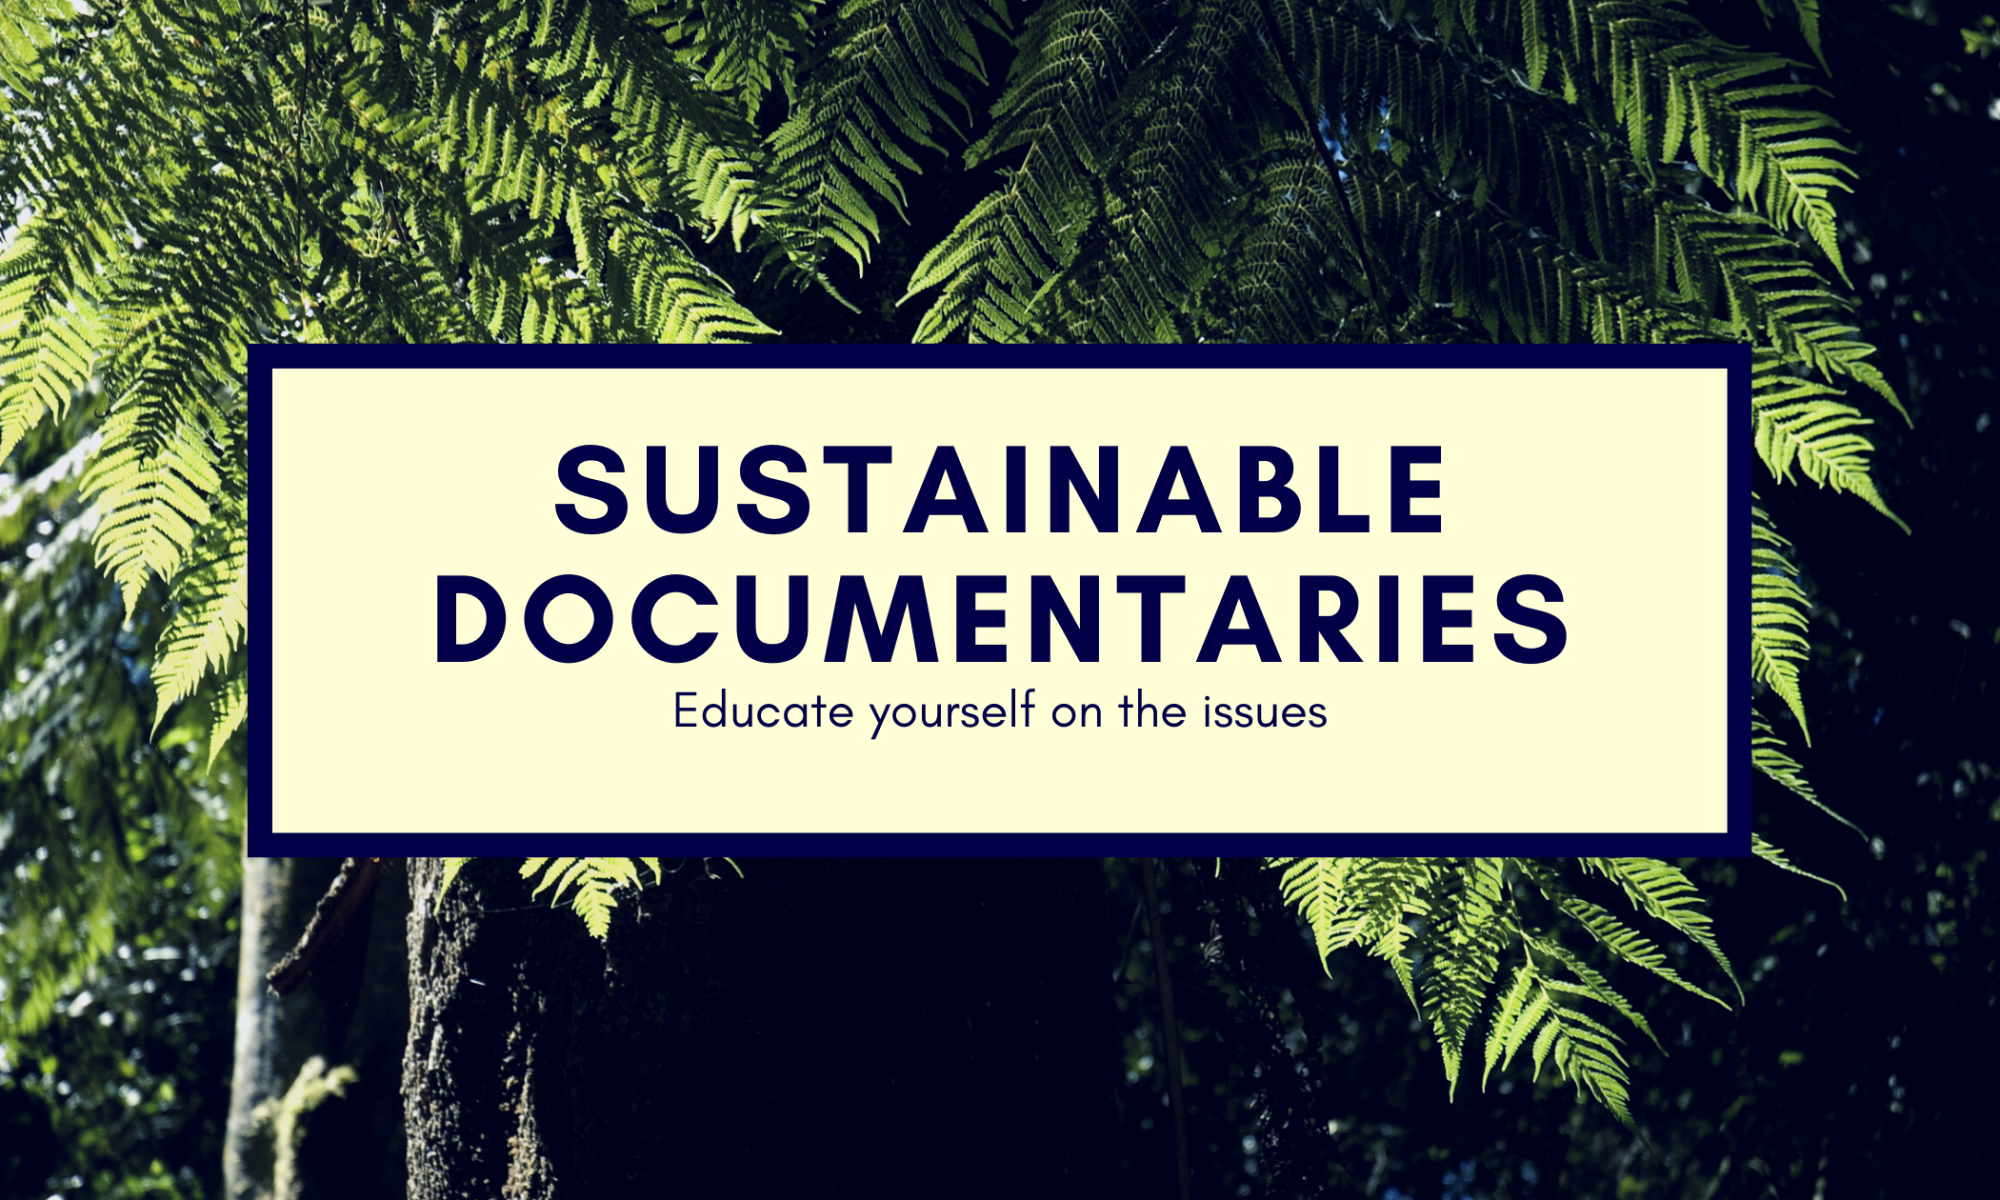 sustainable documentaries, educate yourself on the issues